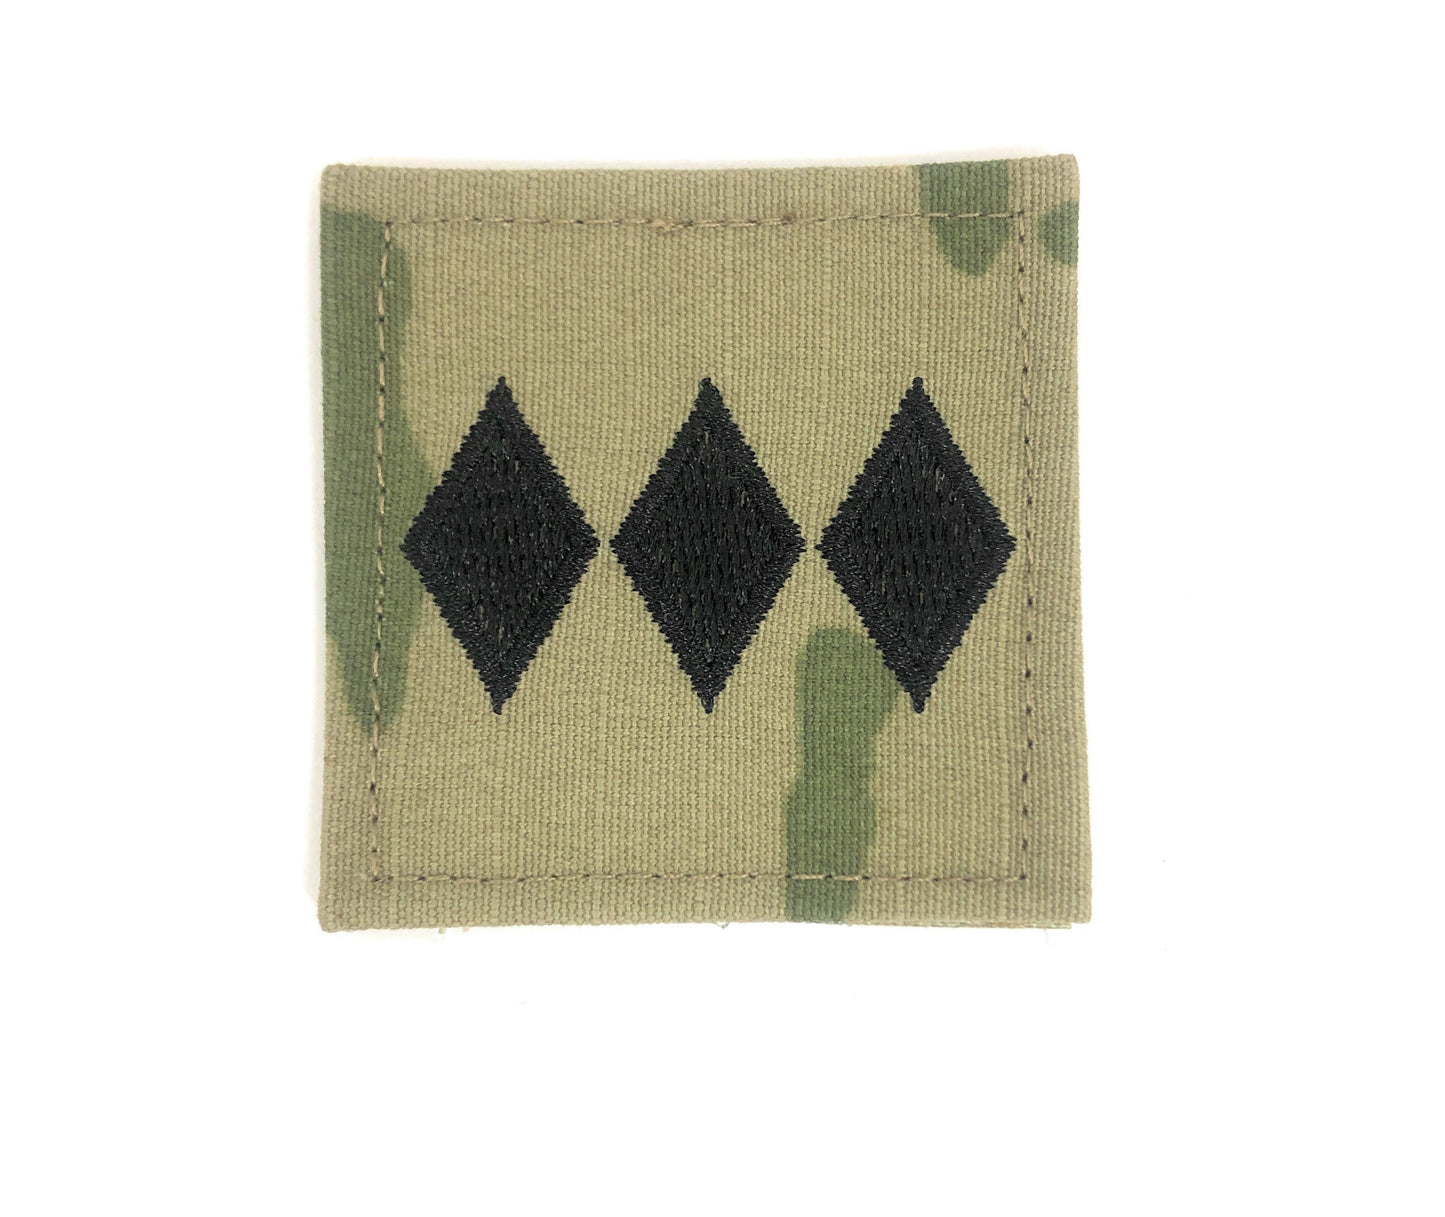 ROTC Colonel OCP Rank with Hook Fastener